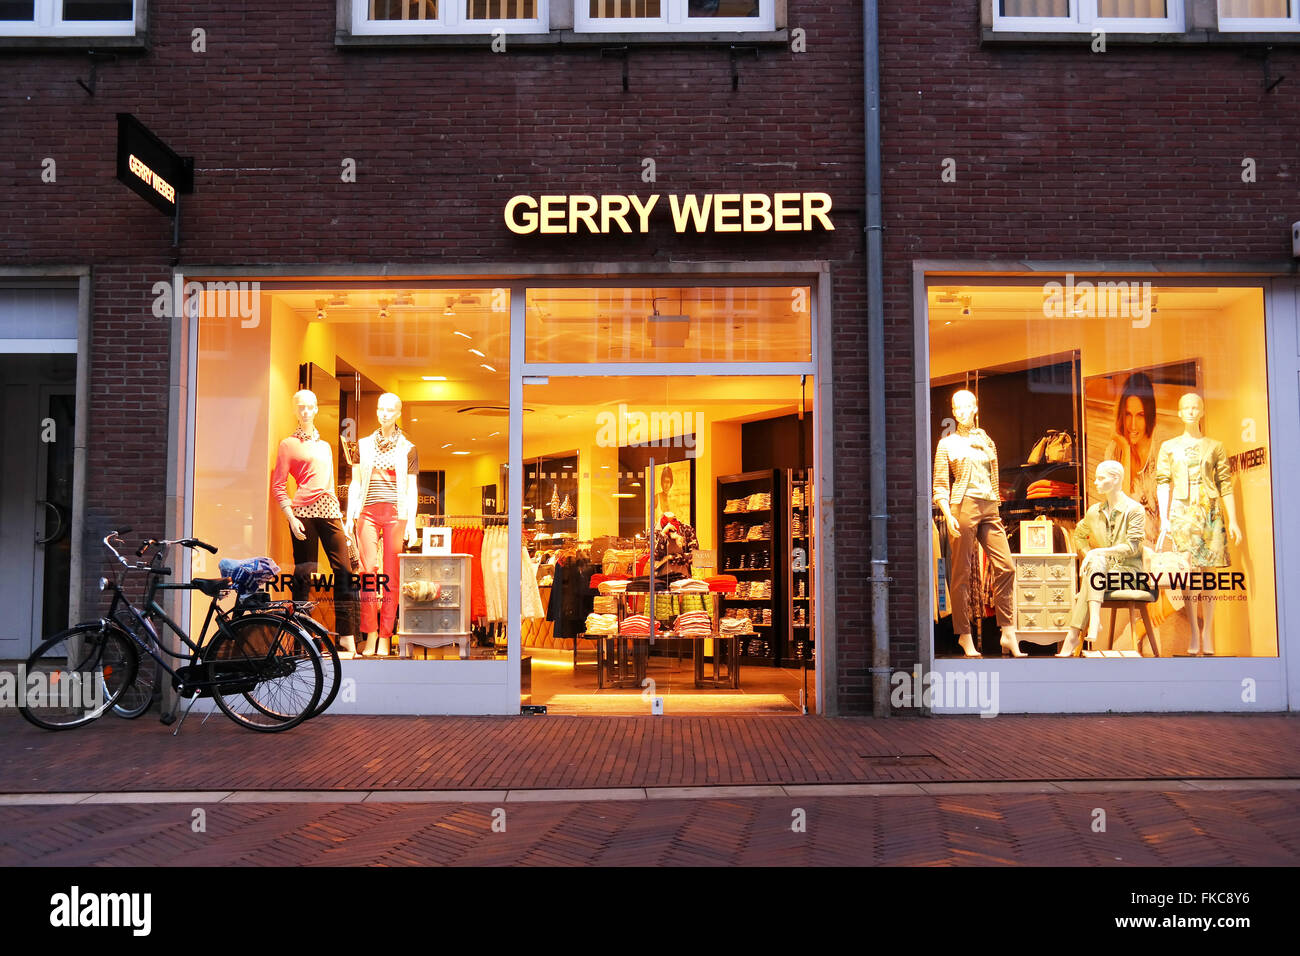 Gerry Weber High Resolution Stock Photography and Images - Alamy